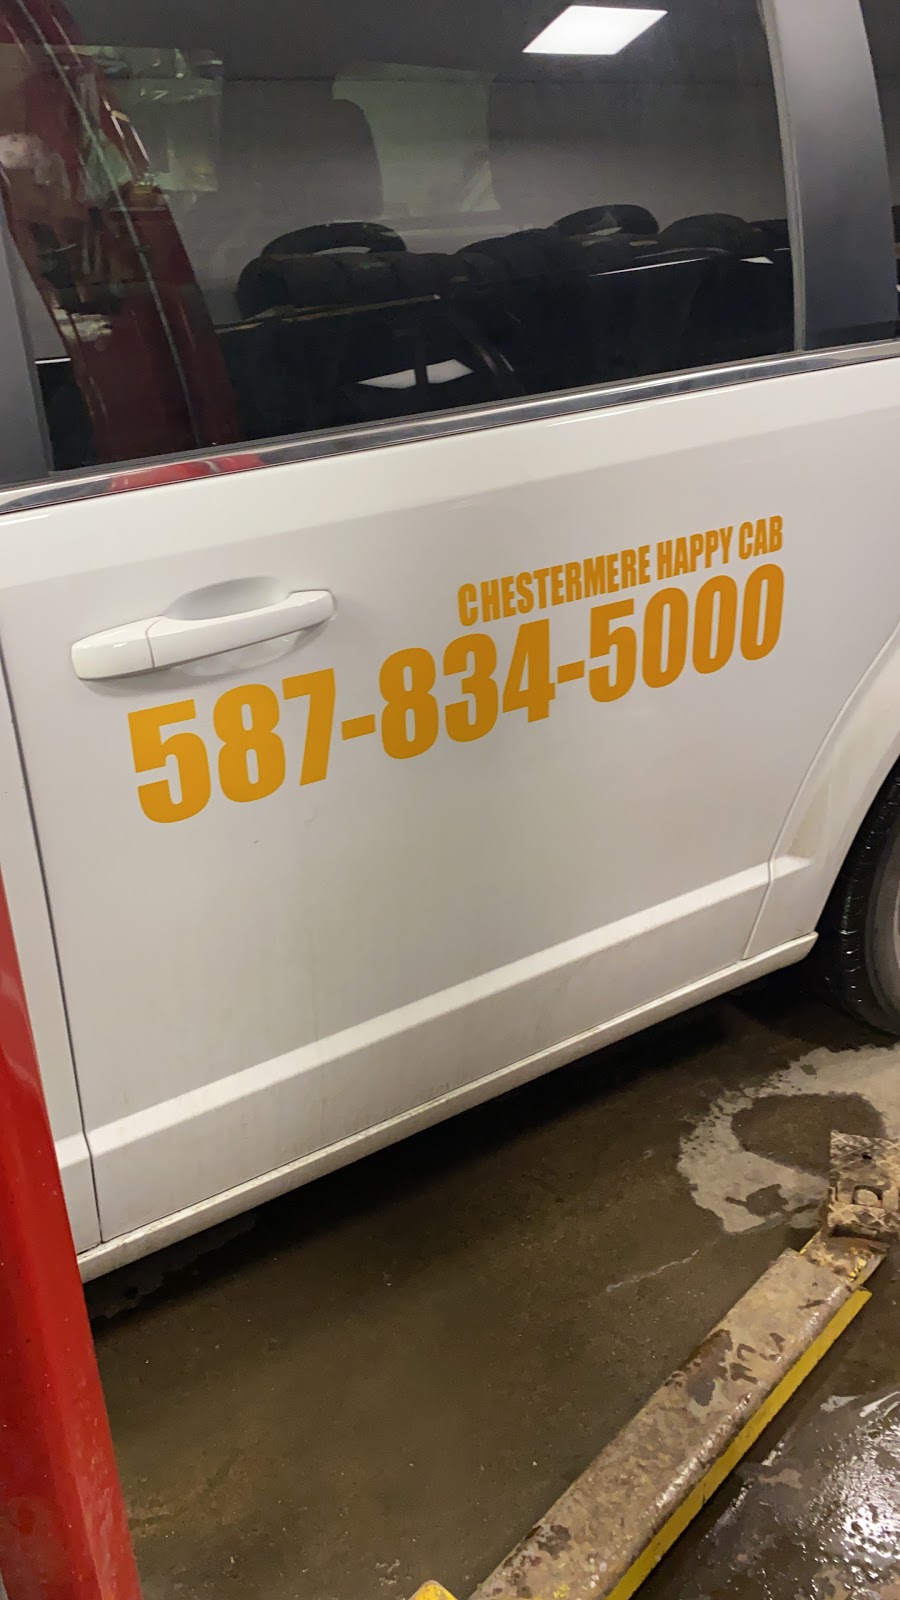 Chestermere Happy Cab Service | 155 Kinniburgh Ln, Chestermere, AB T1X 1Y2, Canada | Phone: (587) 834-5000